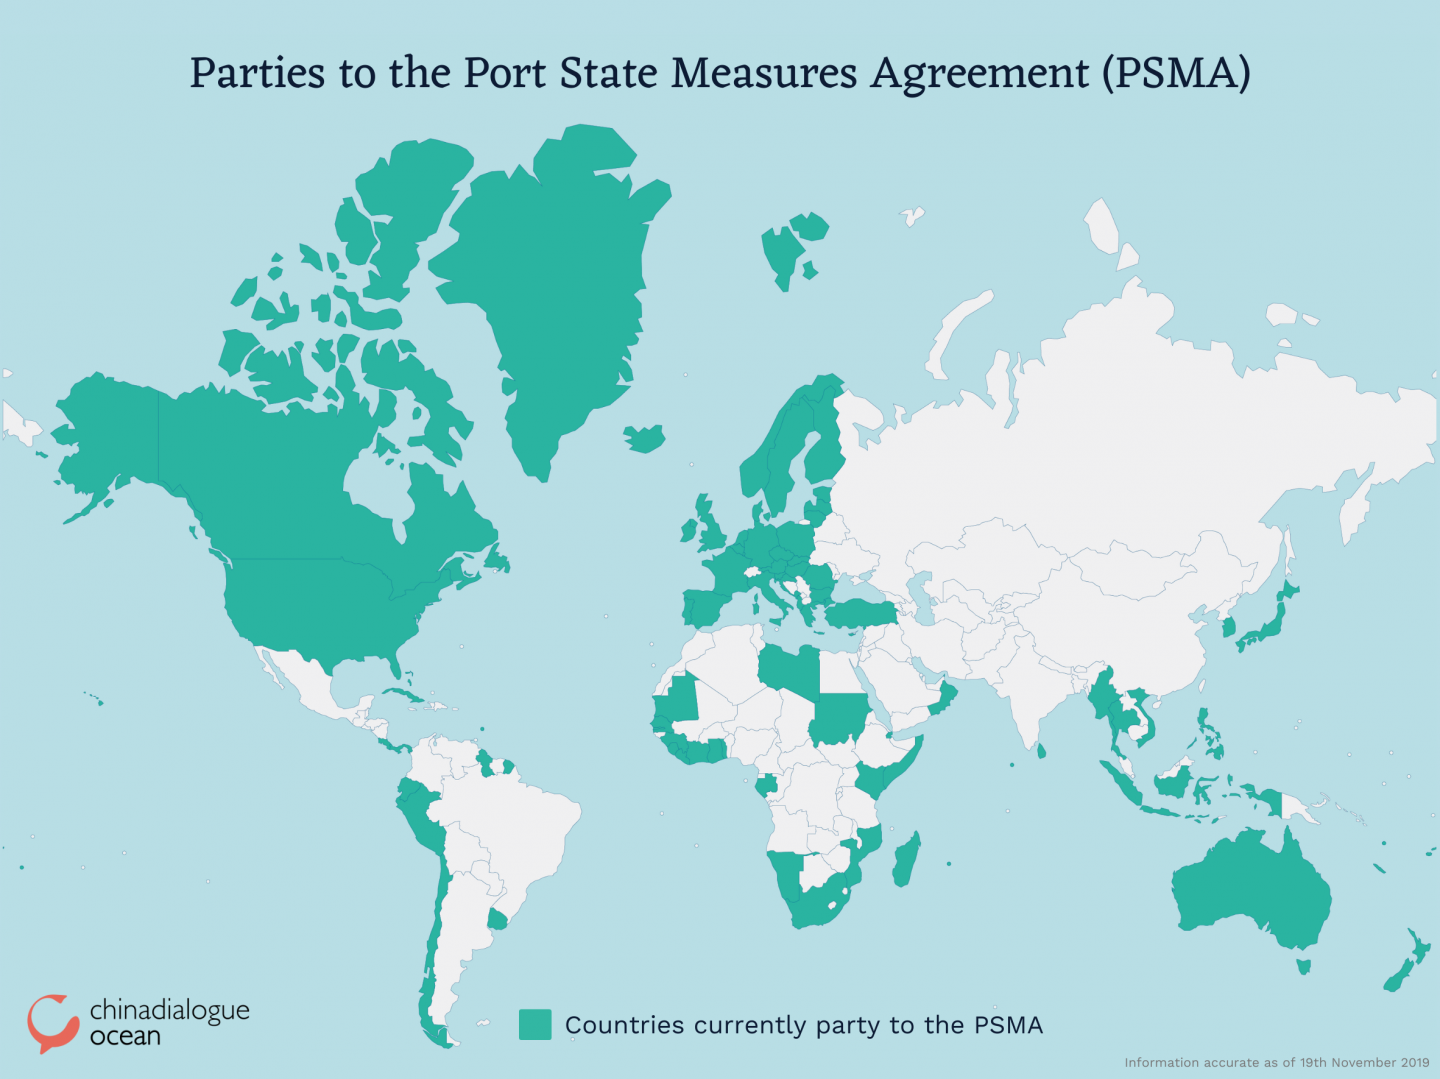 which countries are party to PSMA (Port State Measures Agreement)?